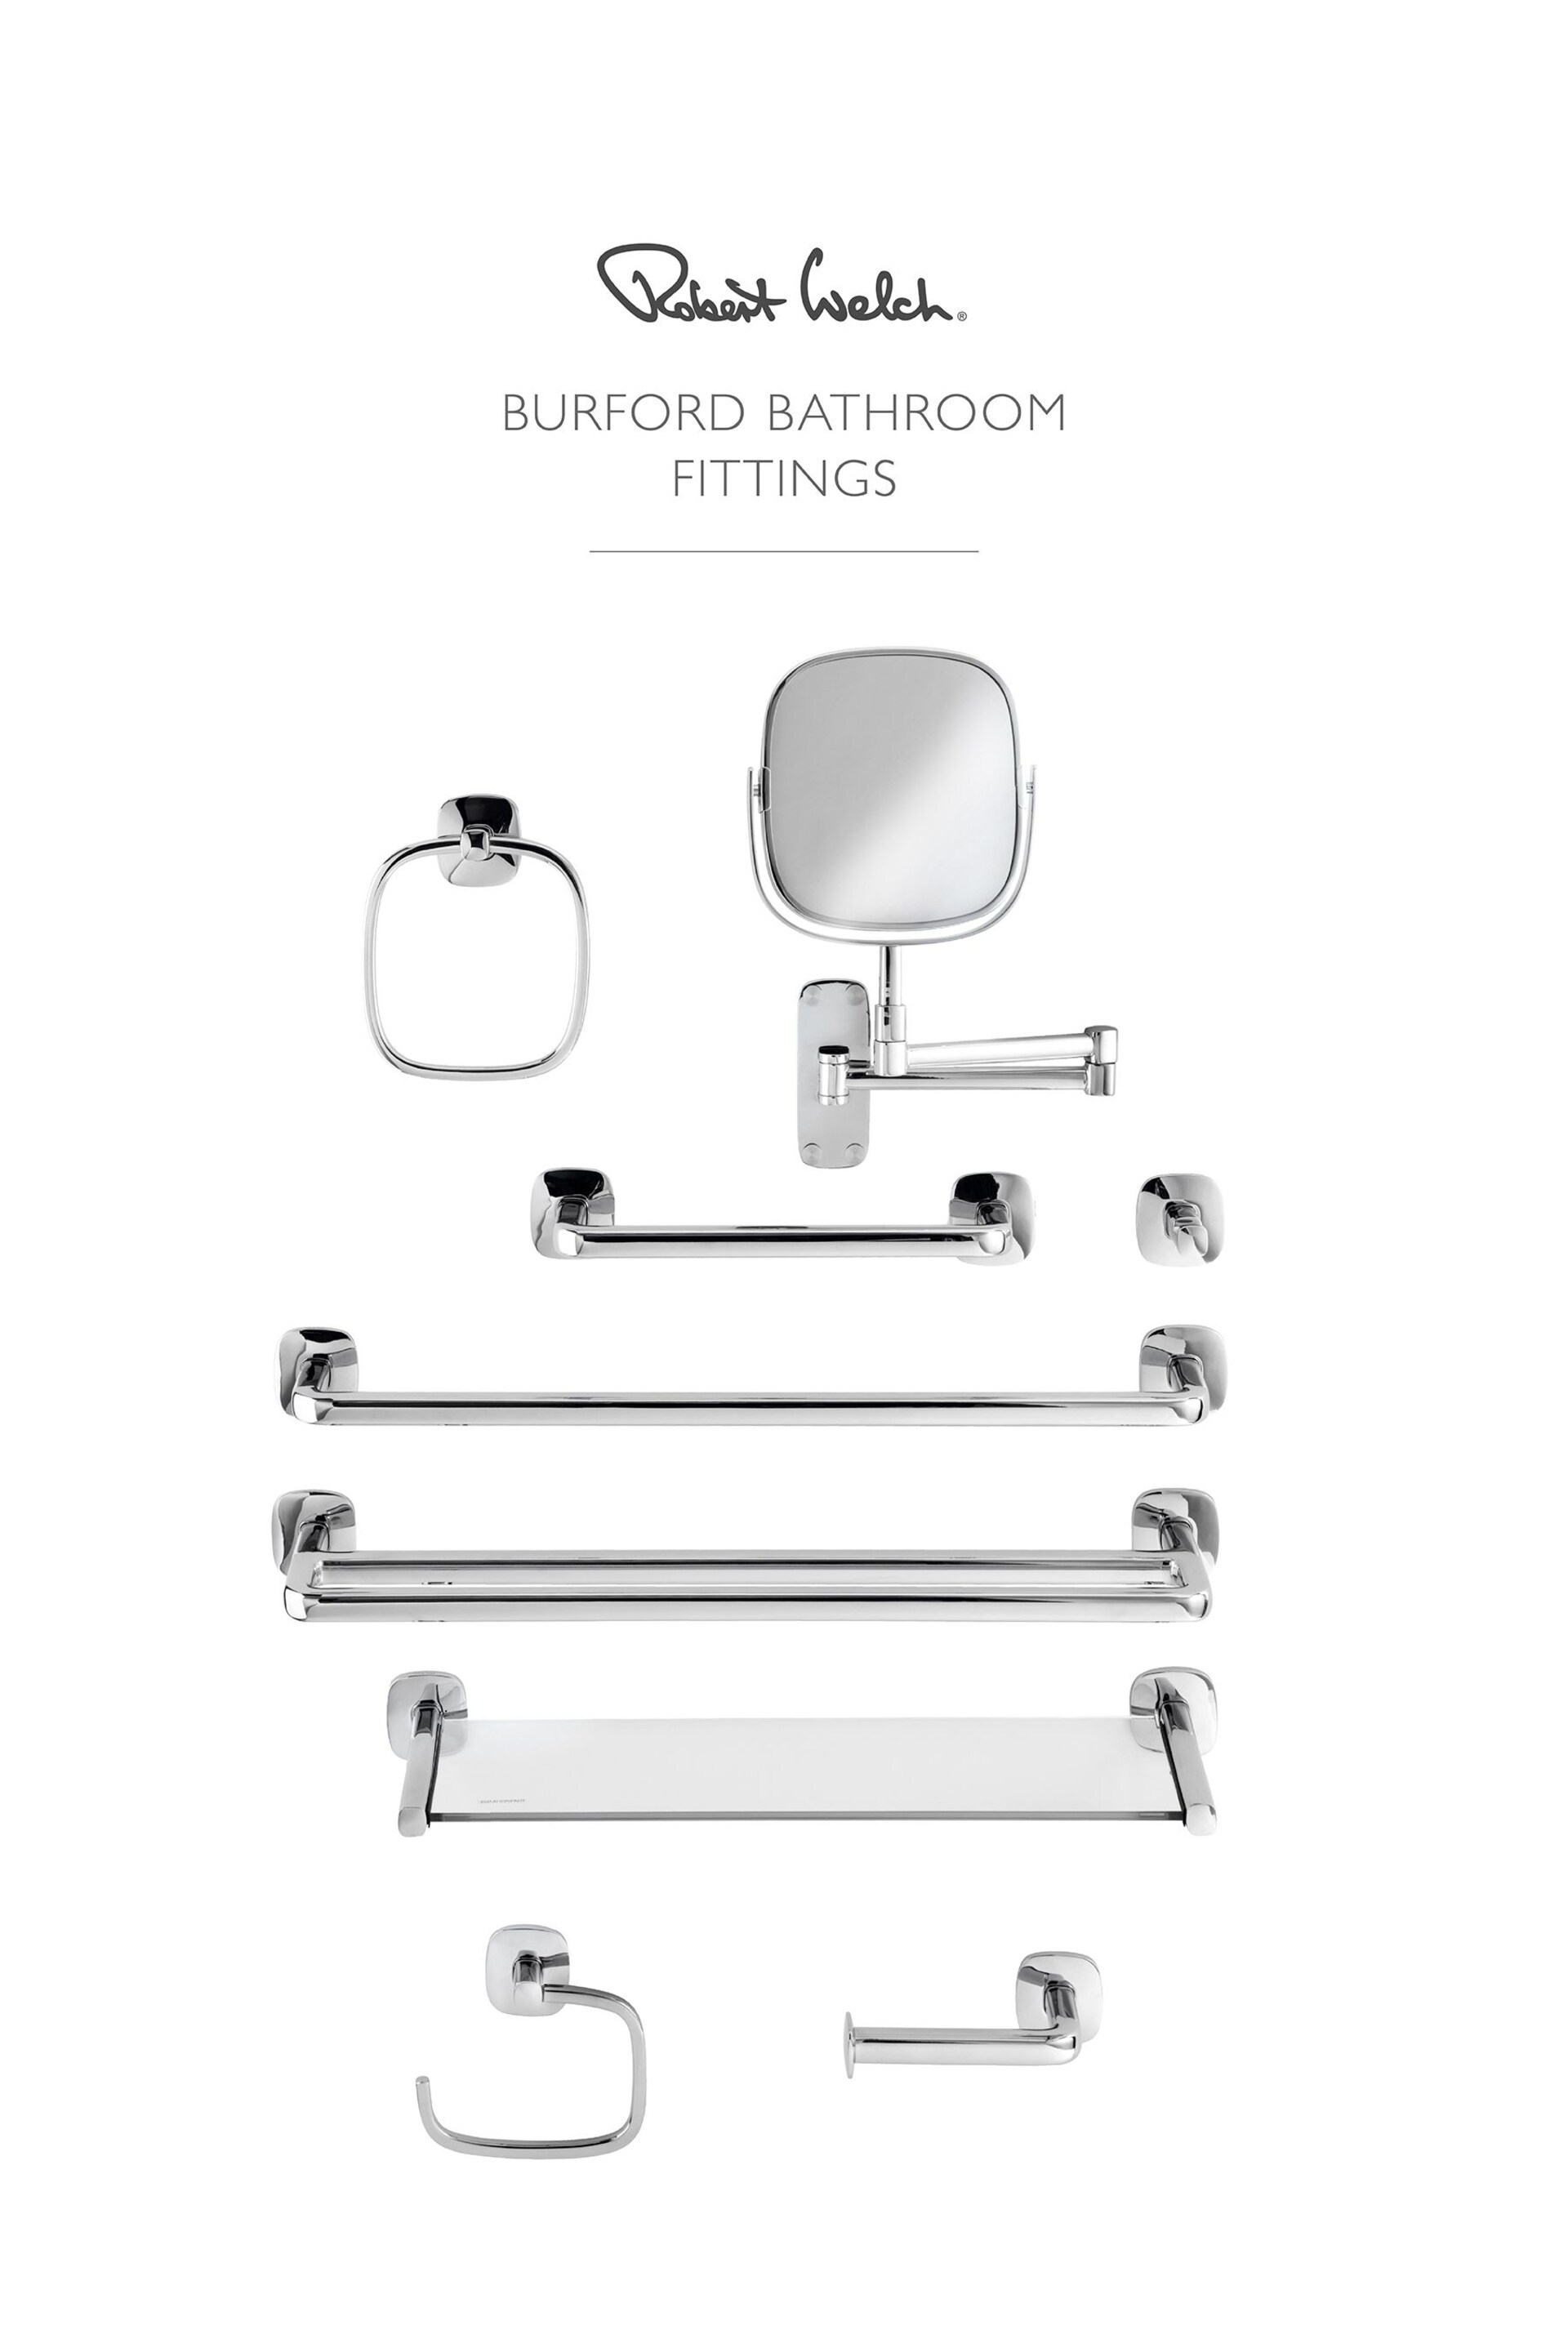 Robert Welch Silver Burford Toilet Roll Holder Swing - Image 4 of 4